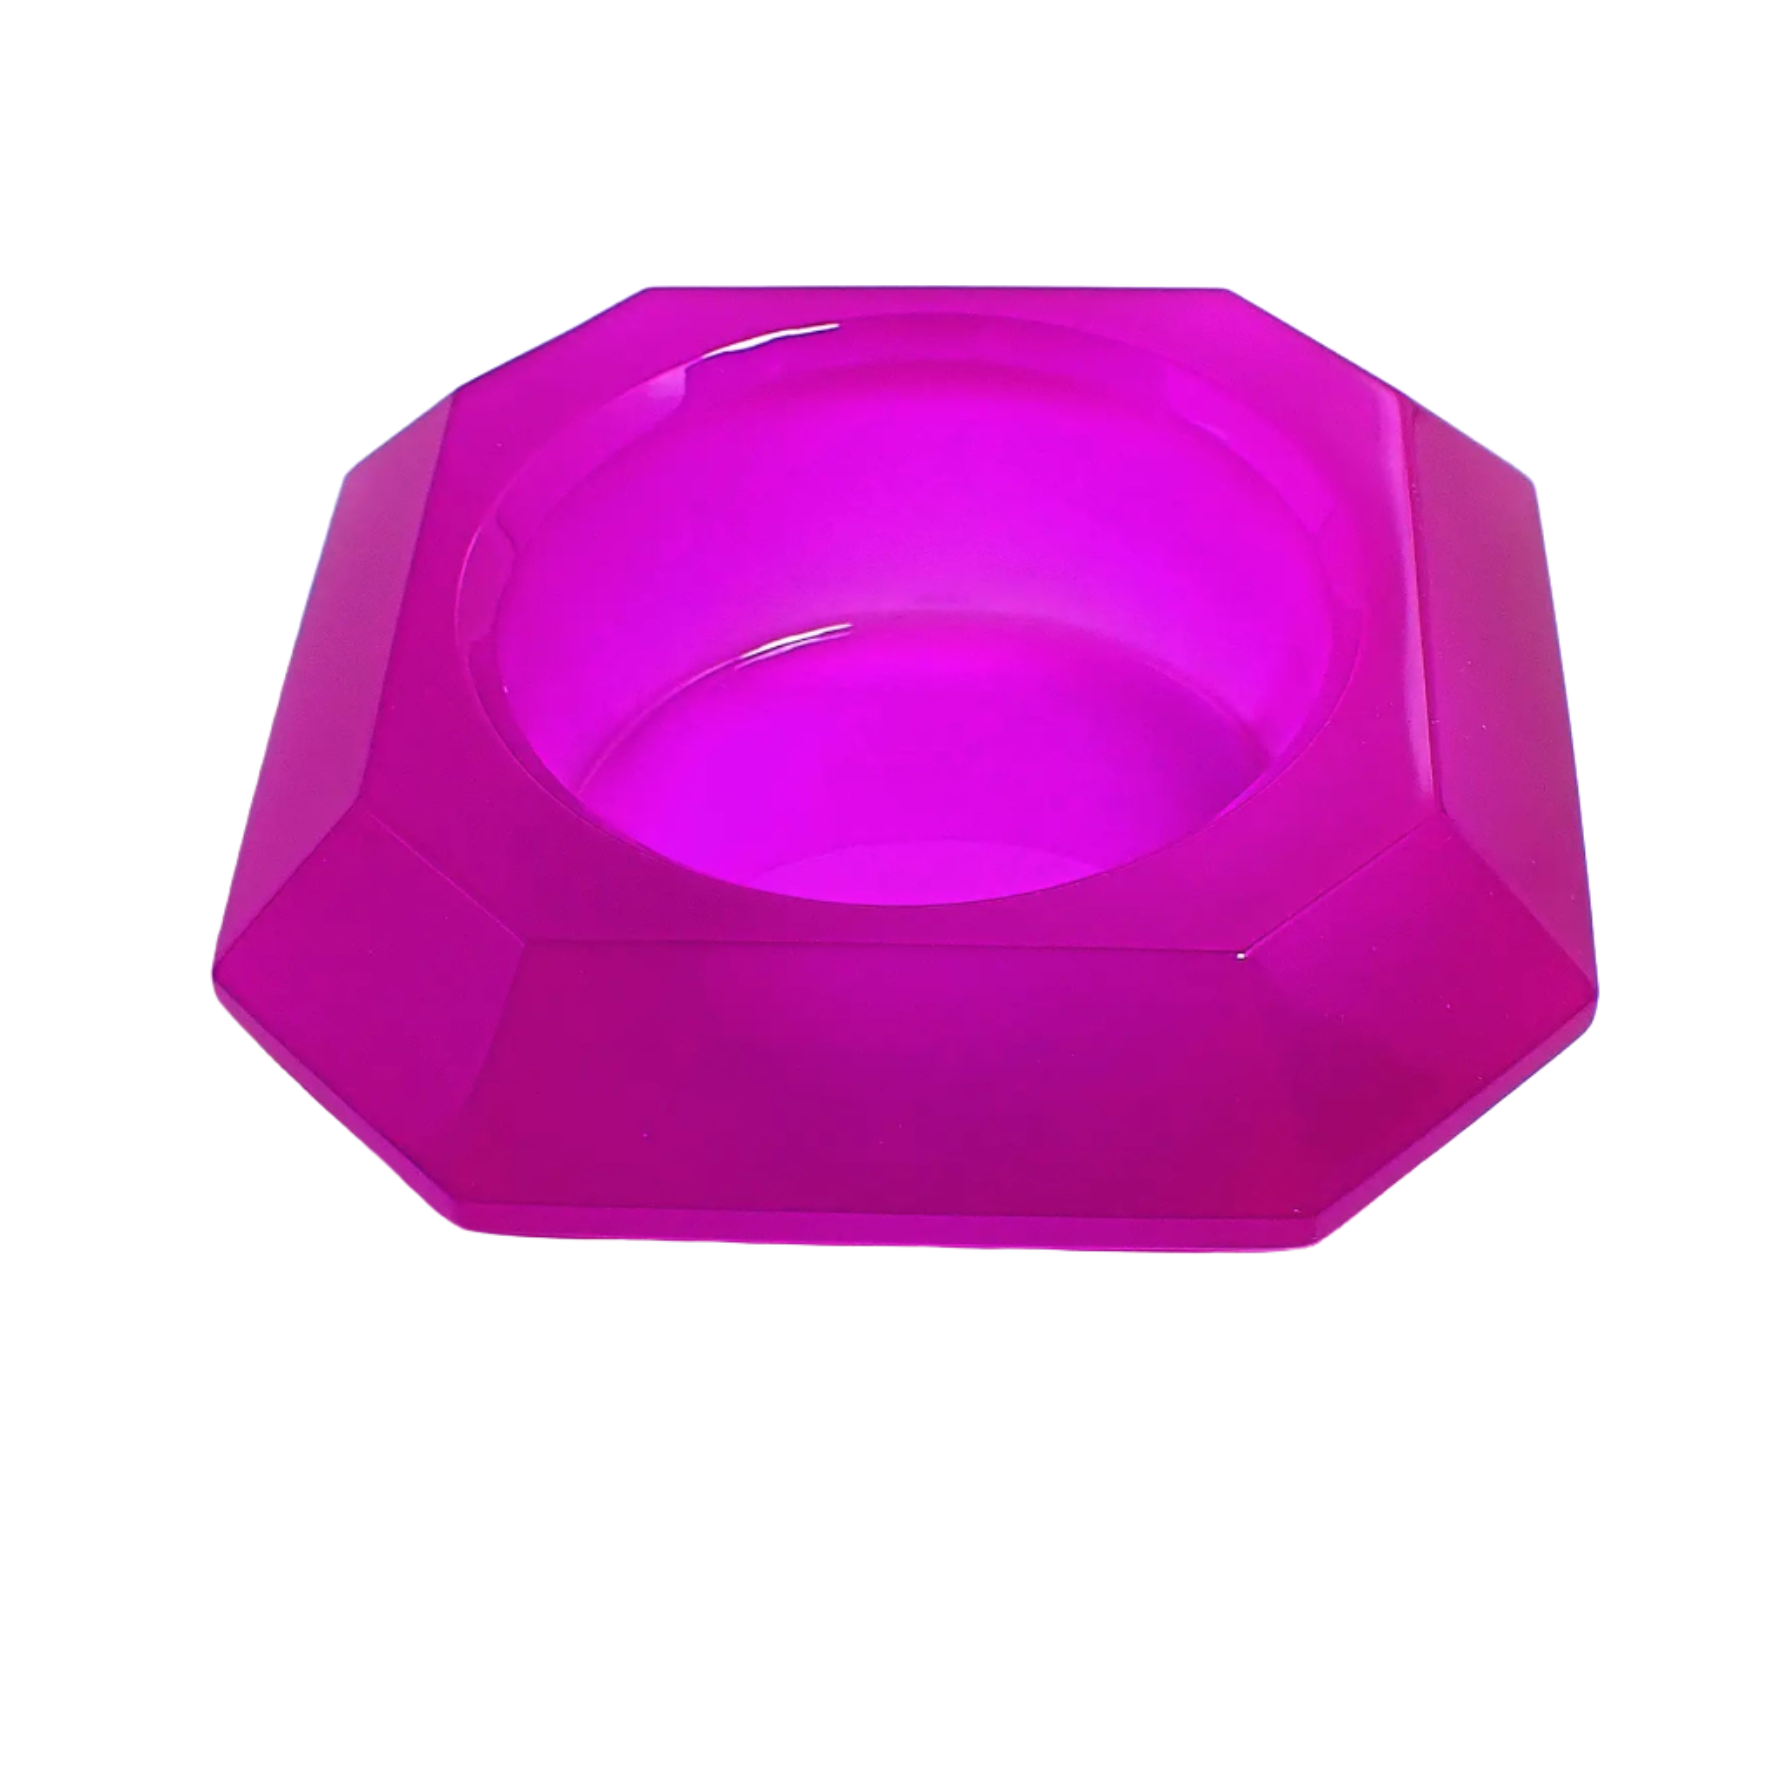 Photo of the handmade resin geometric decorative pot. The resin is neon purple in color. It has a faceted octagon shape that tapers down to the bottom. There is a circular opening in the middle to put things.